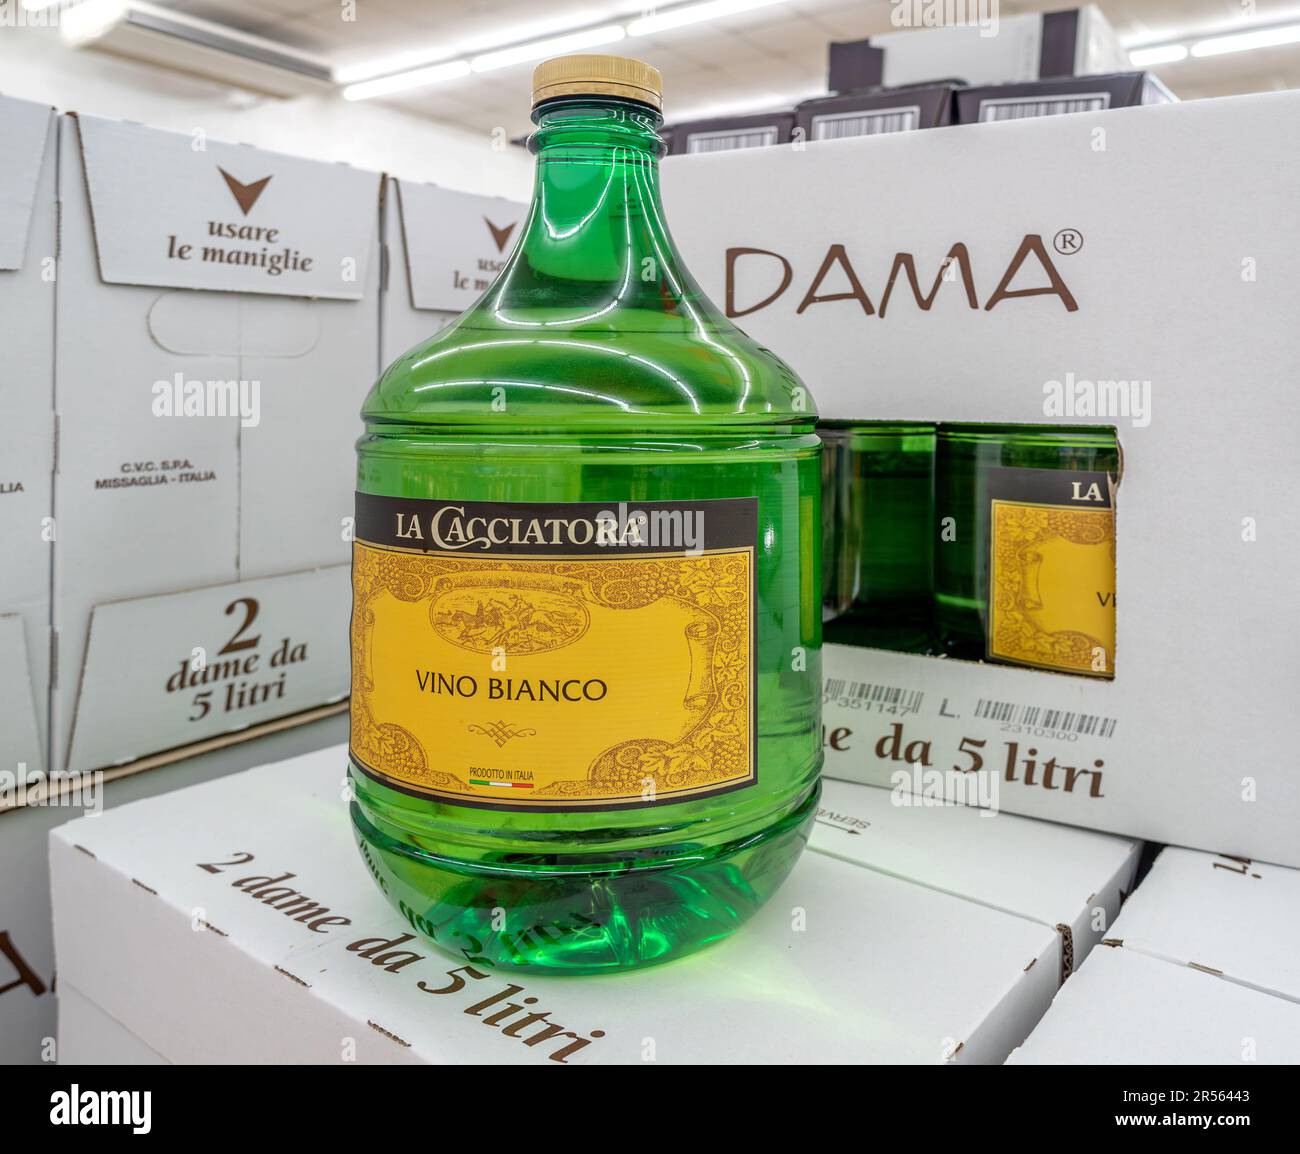 Italy - May 21, 2023: Italian white wine in 5-liter bottle, called in Italian Dama, displayed on cardboard boxes of La Cacciatora brand for sale in It Stock Photo